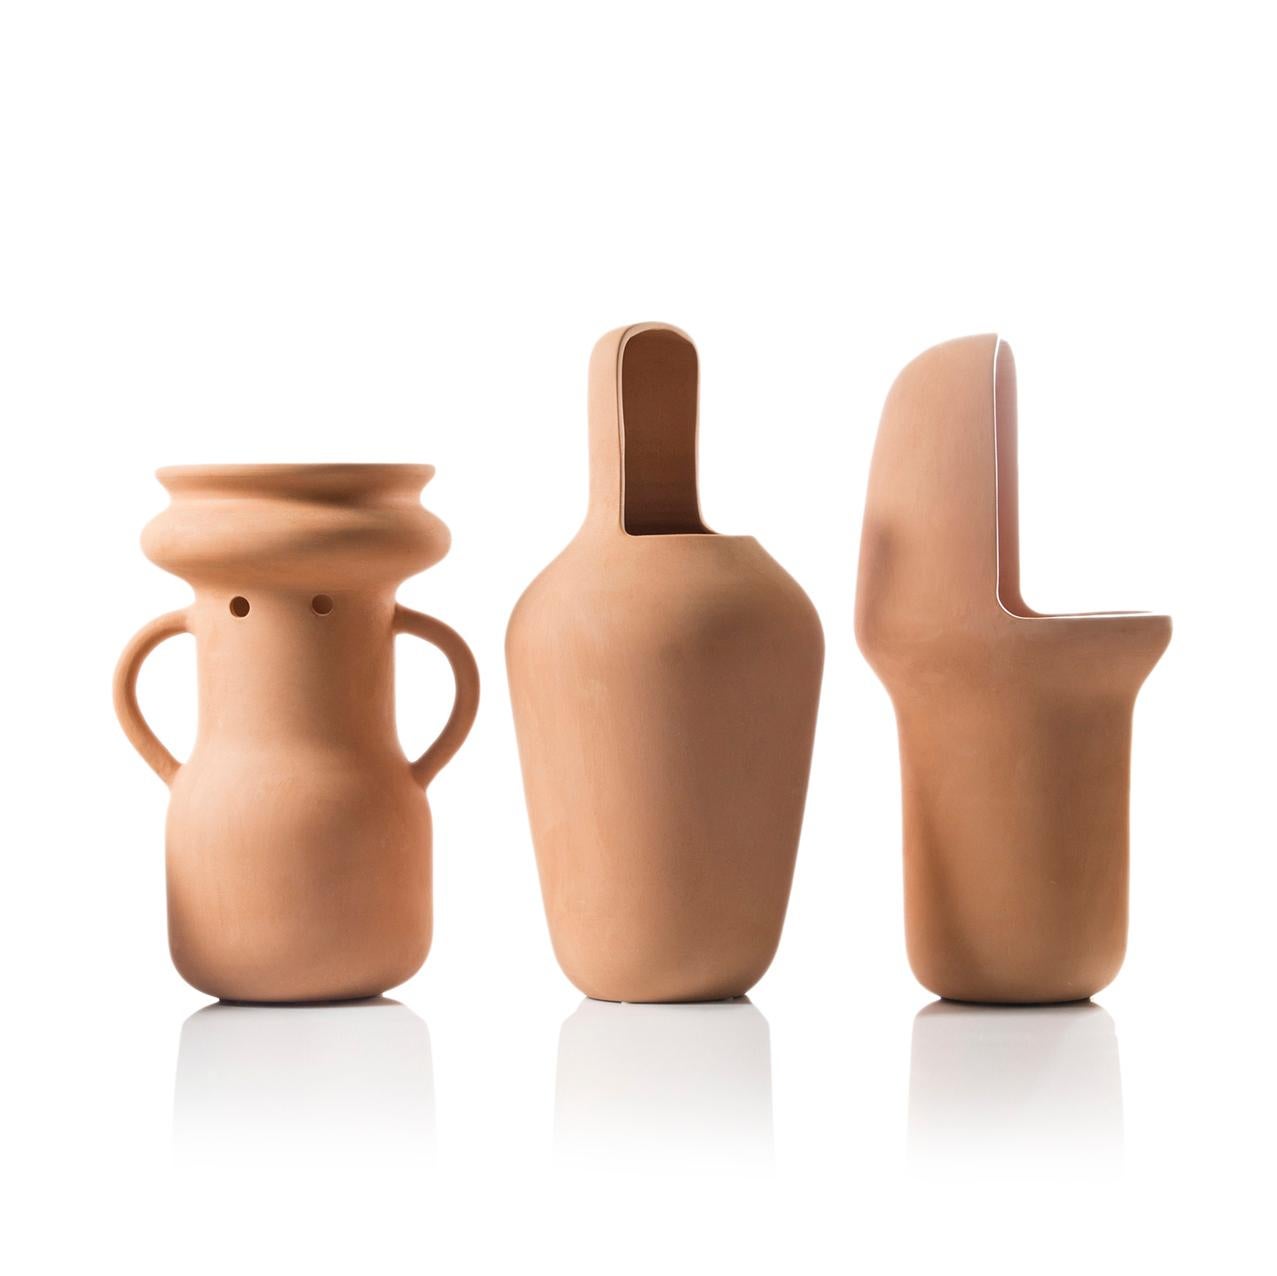 Jaime Hayon Gardenias Contemporary Terracotta Vase Nº 4 In Excellent Condition For Sale In Barcelona, Barcelona